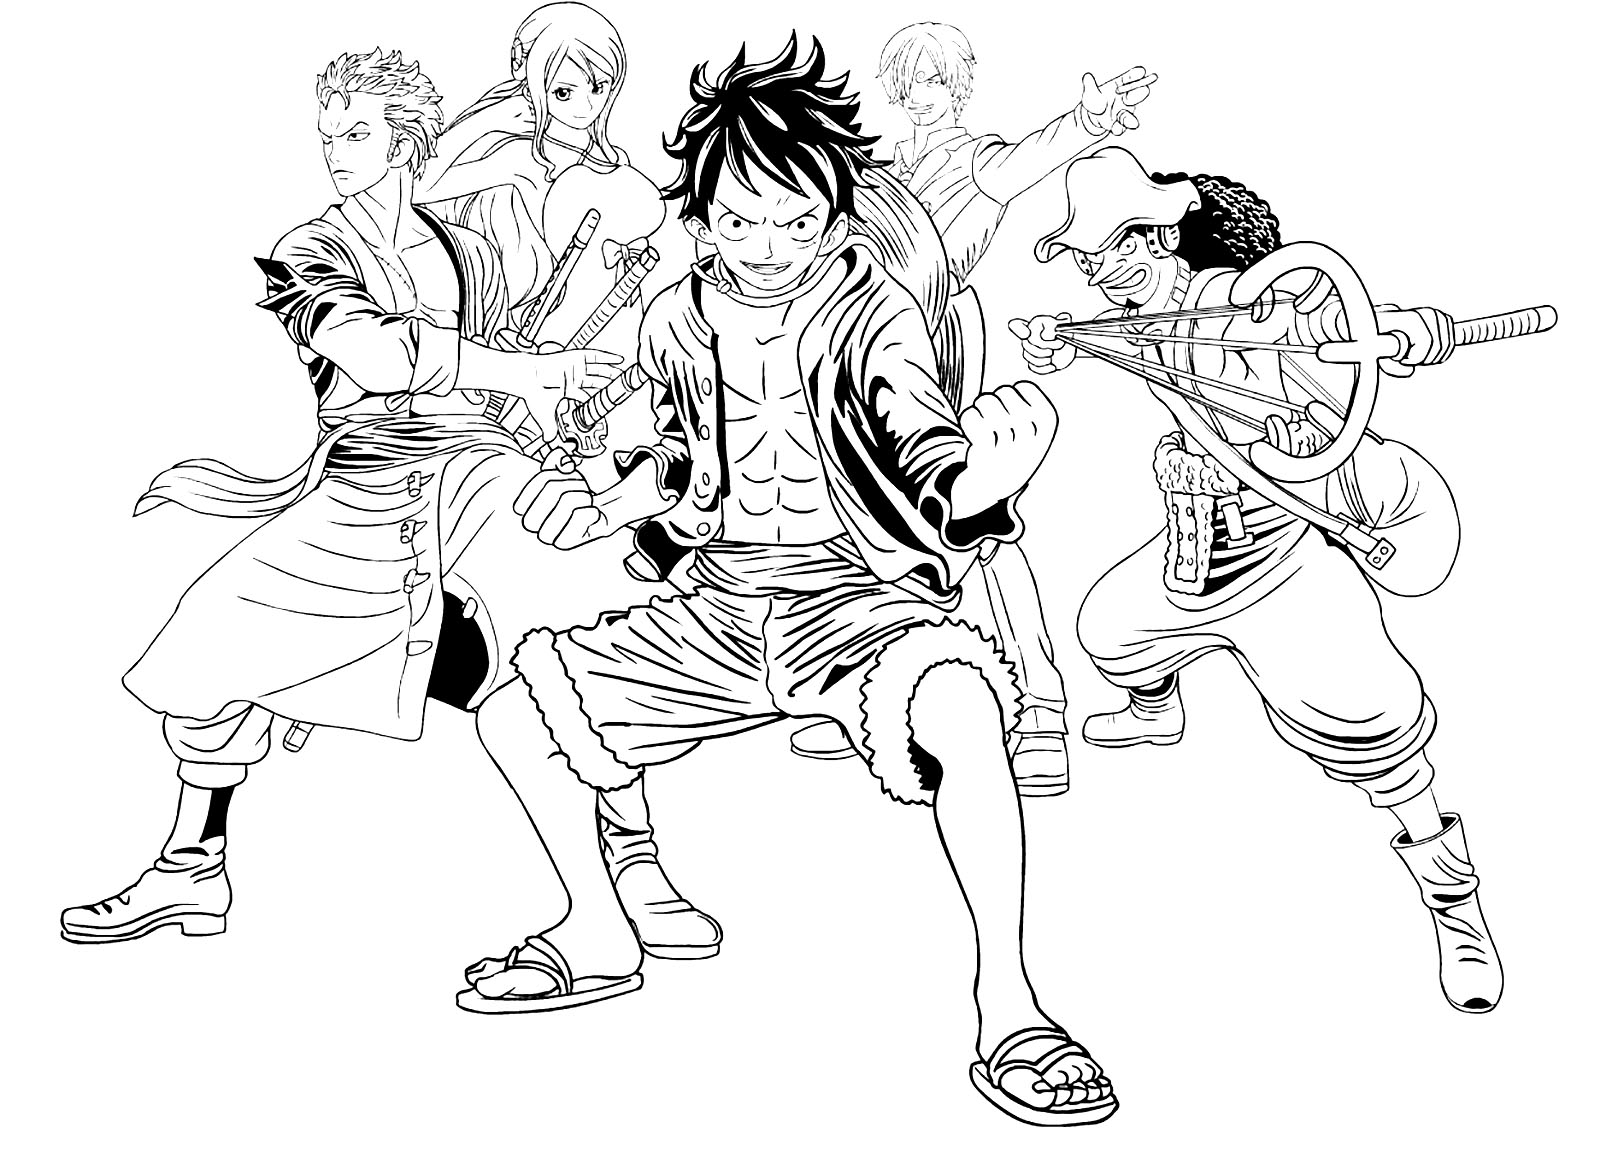 Free One Piece drawing to print and color - One Piece Kids Coloring Pages